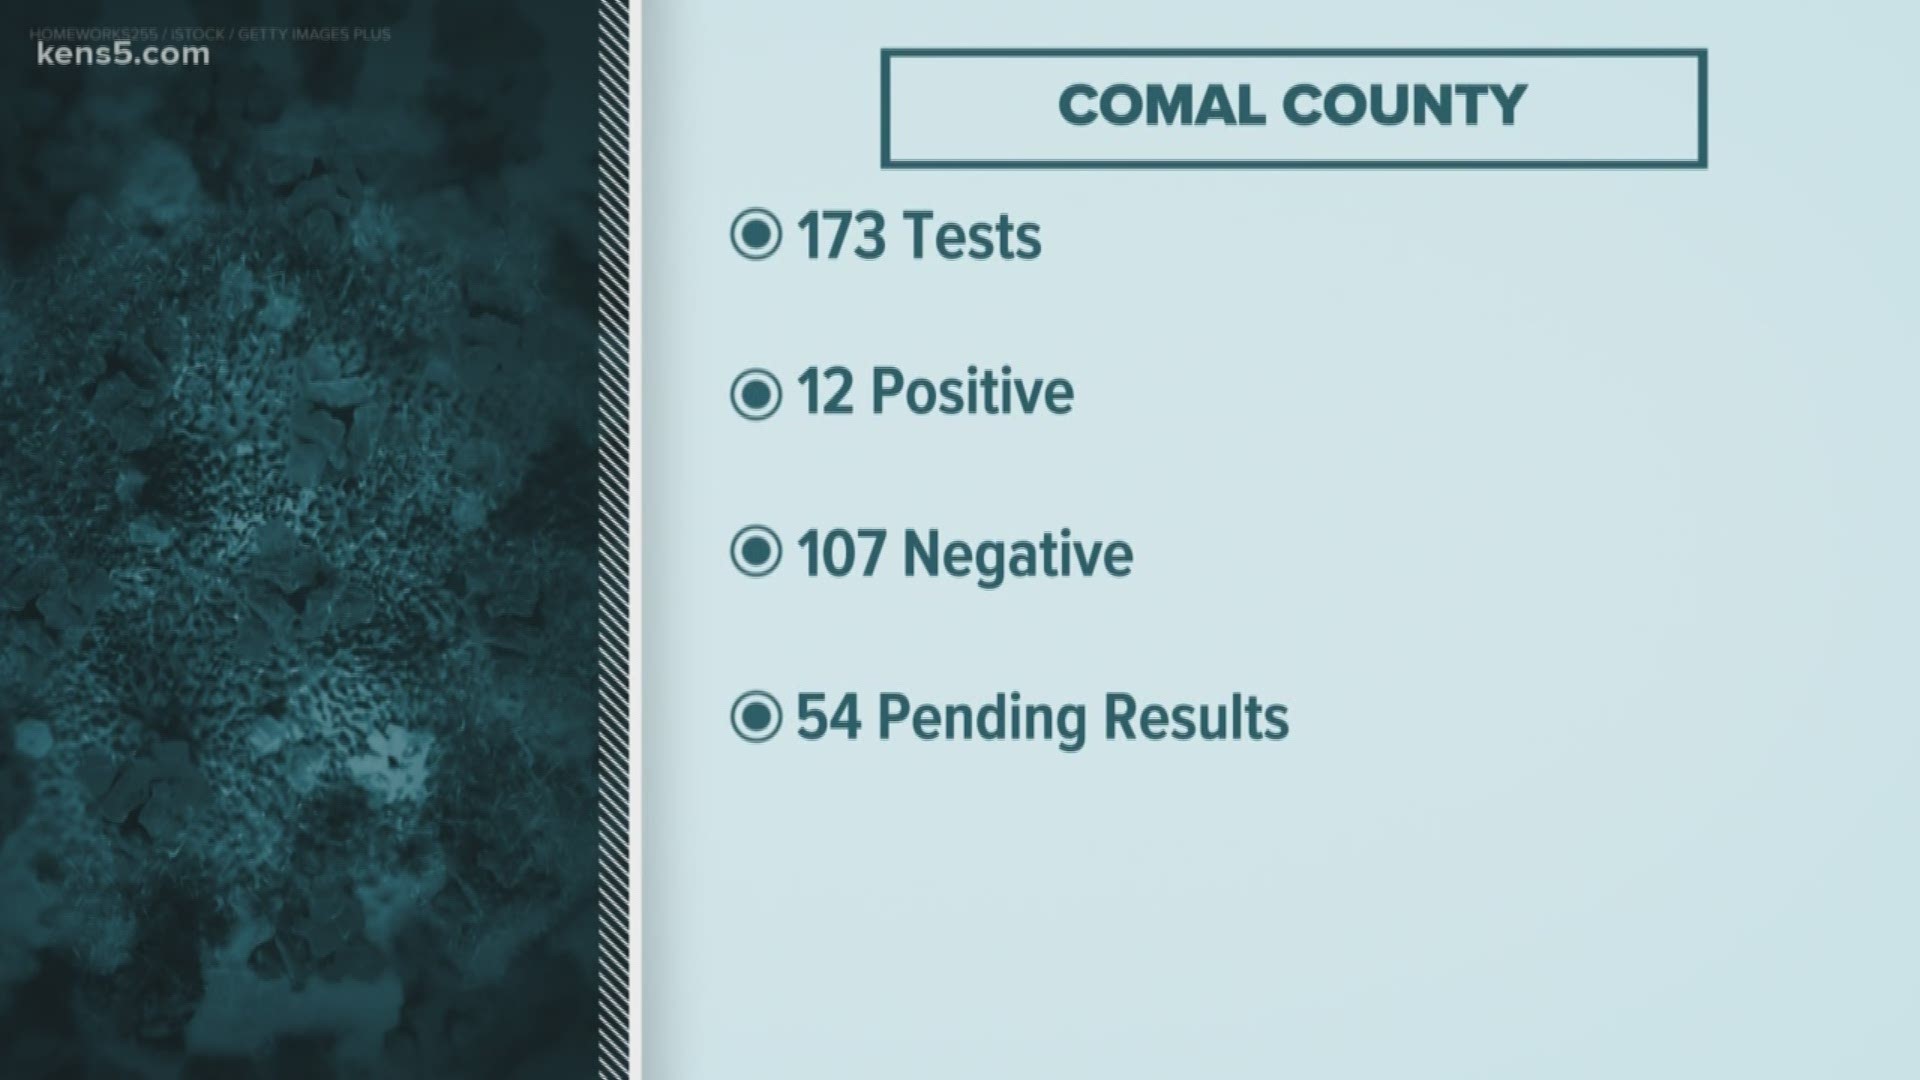 Local leaders confirmed a 12th case of COVID-19 on Wednesday.